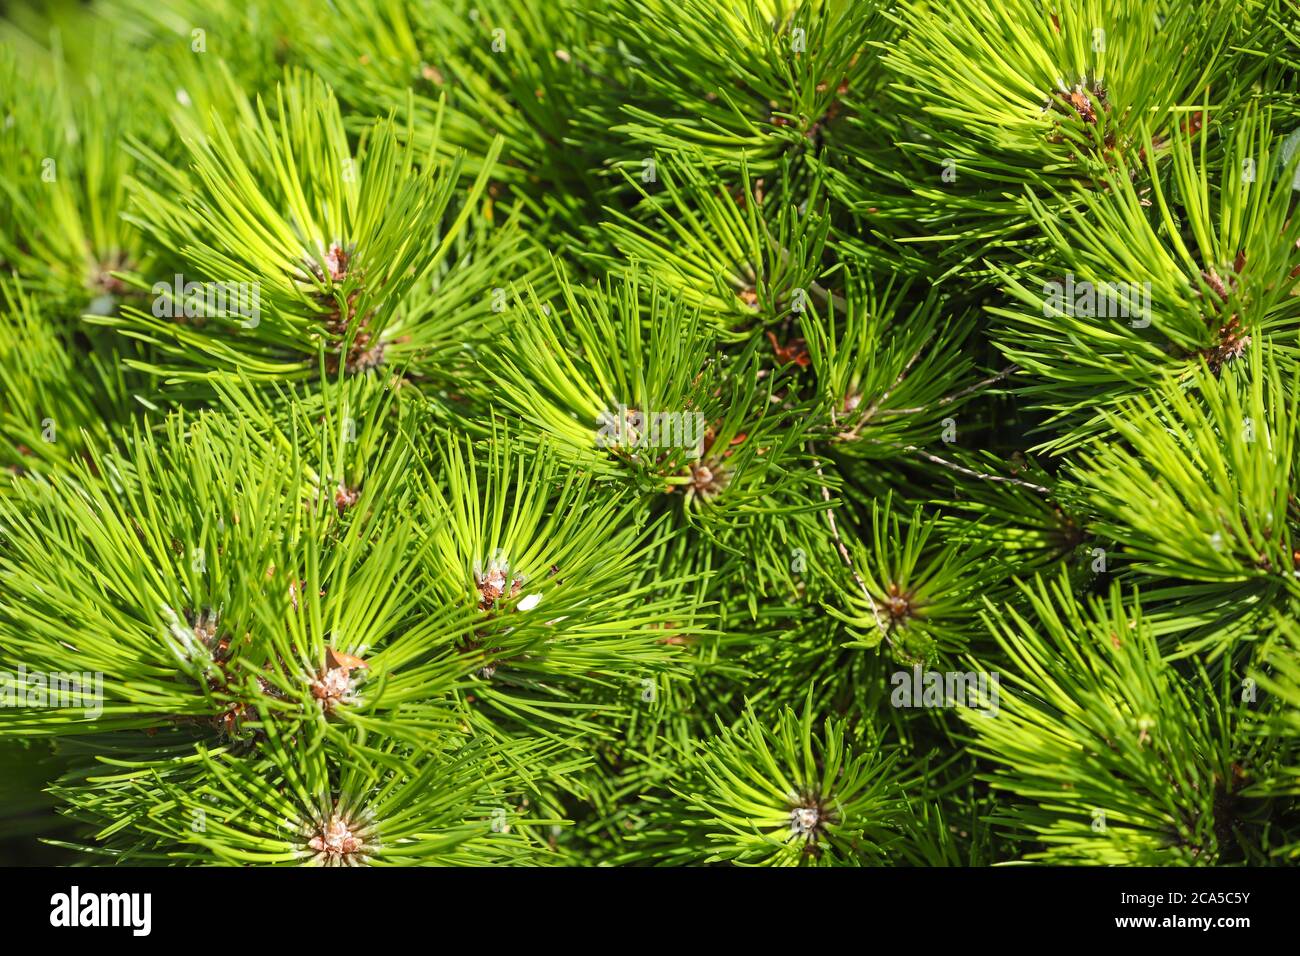 Close up of evergreen branches with vibrant green pine needles in the  afternoon sun as a background of texture Stock Photo